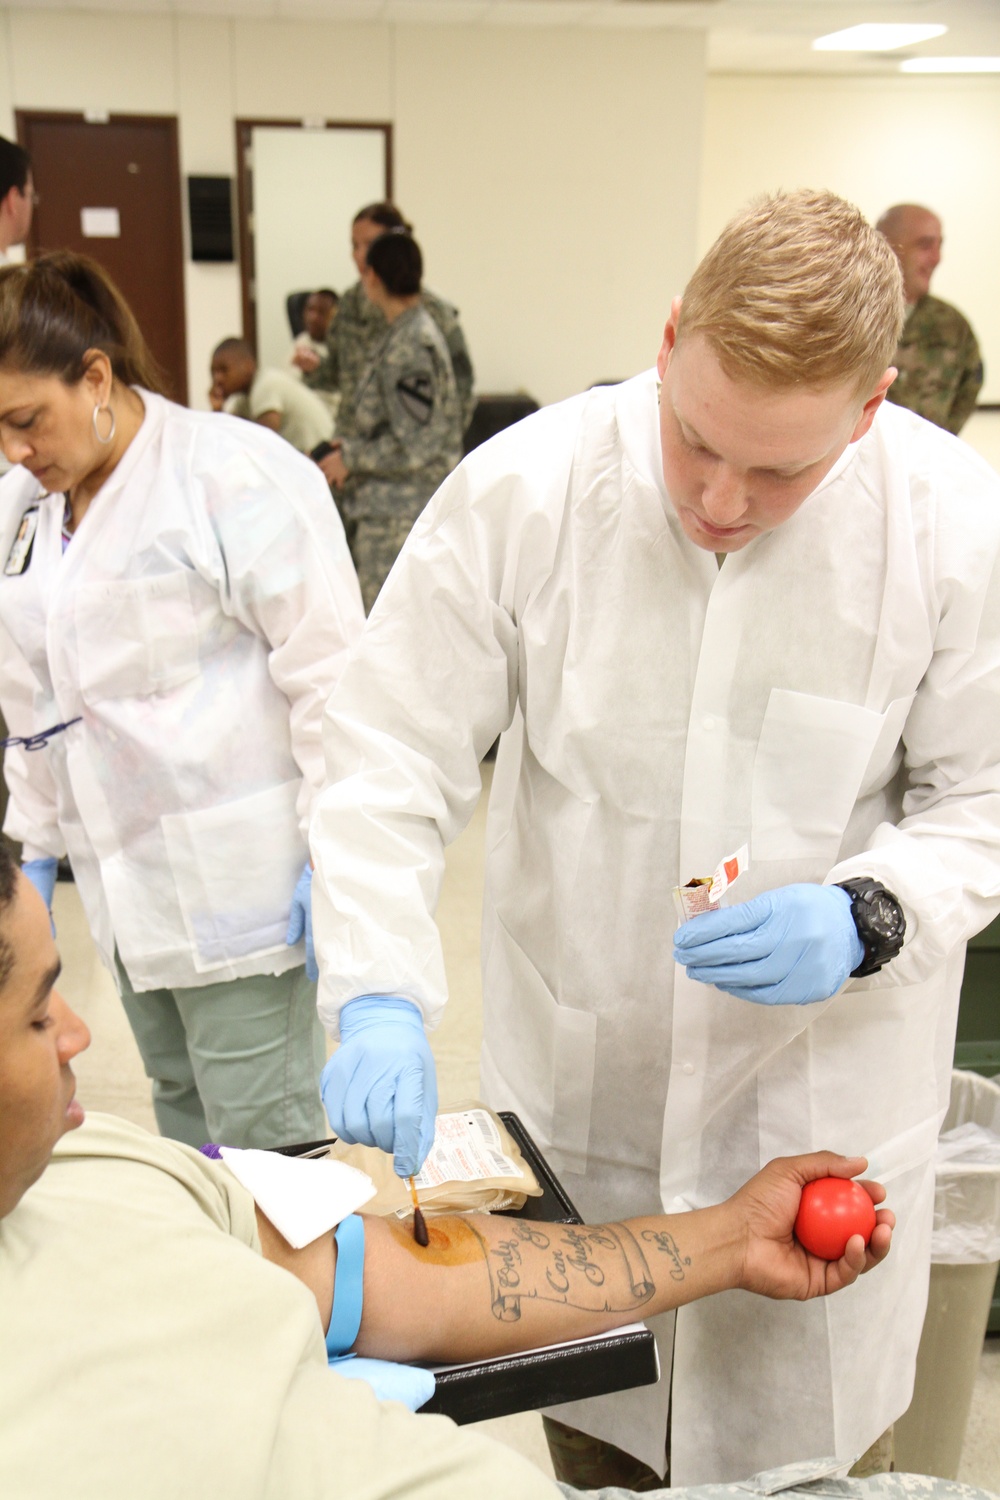 Blood specialist preps a patient for a phlebotomy